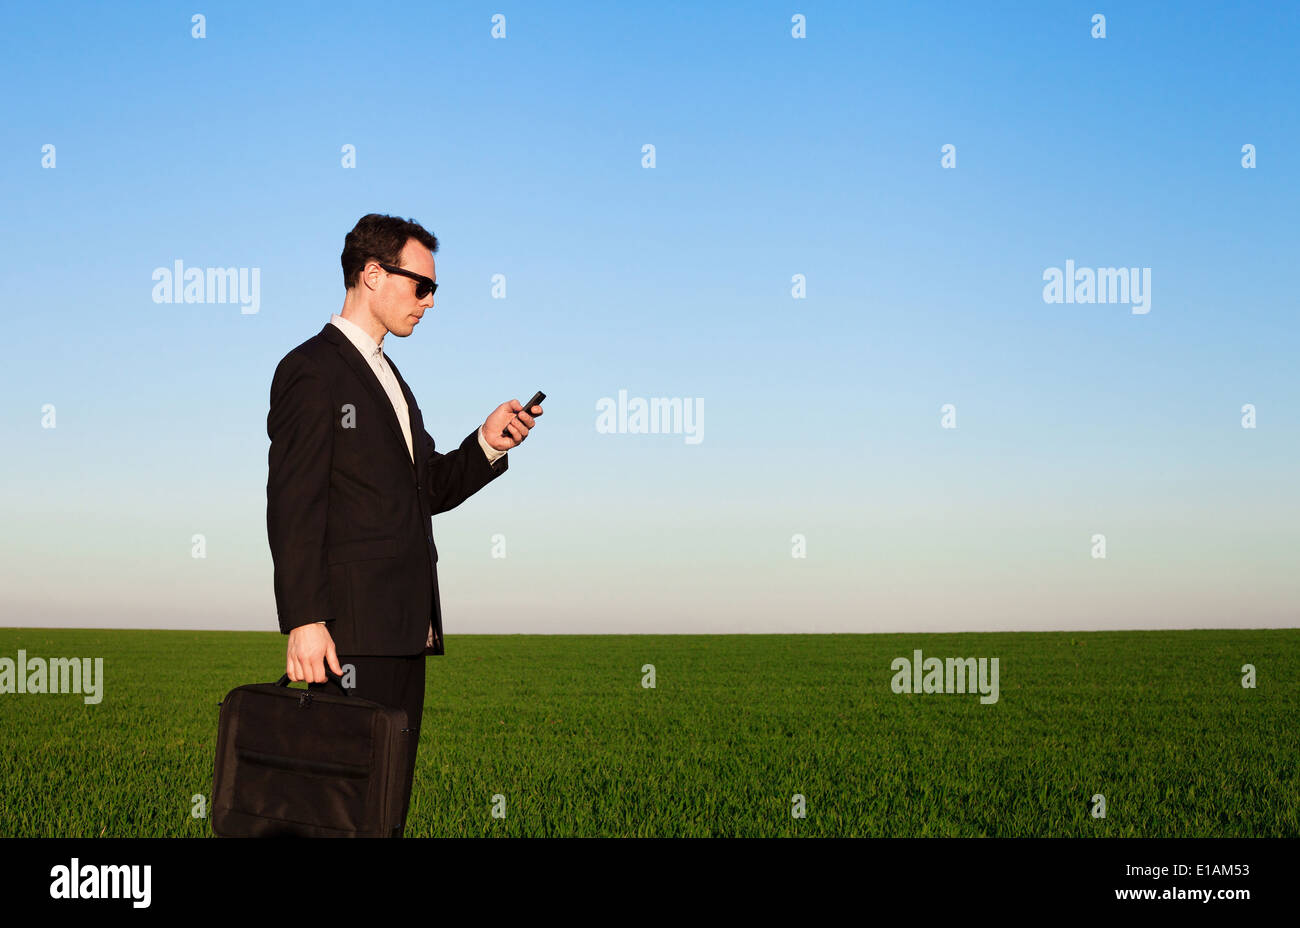 Woman with smartphone in green field Banque D'Images